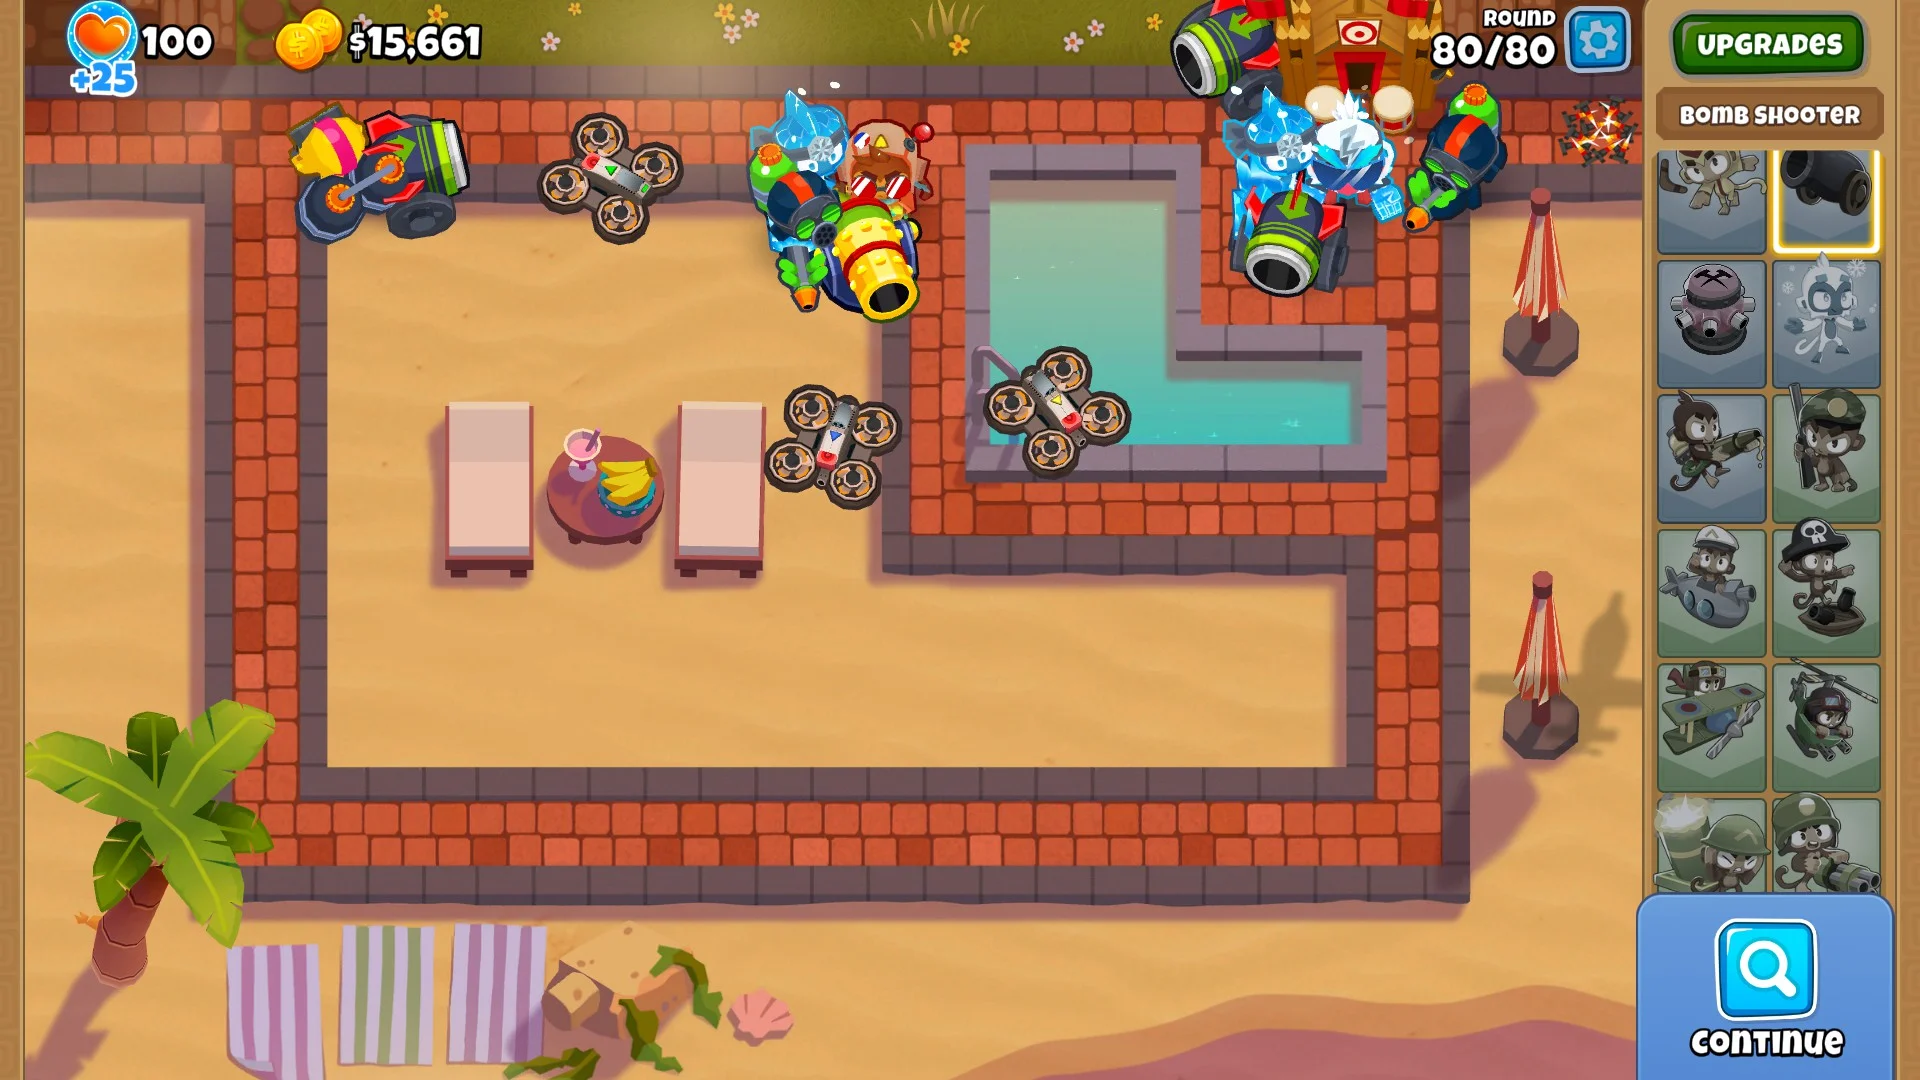 A Quick Guide to Golden Bloons